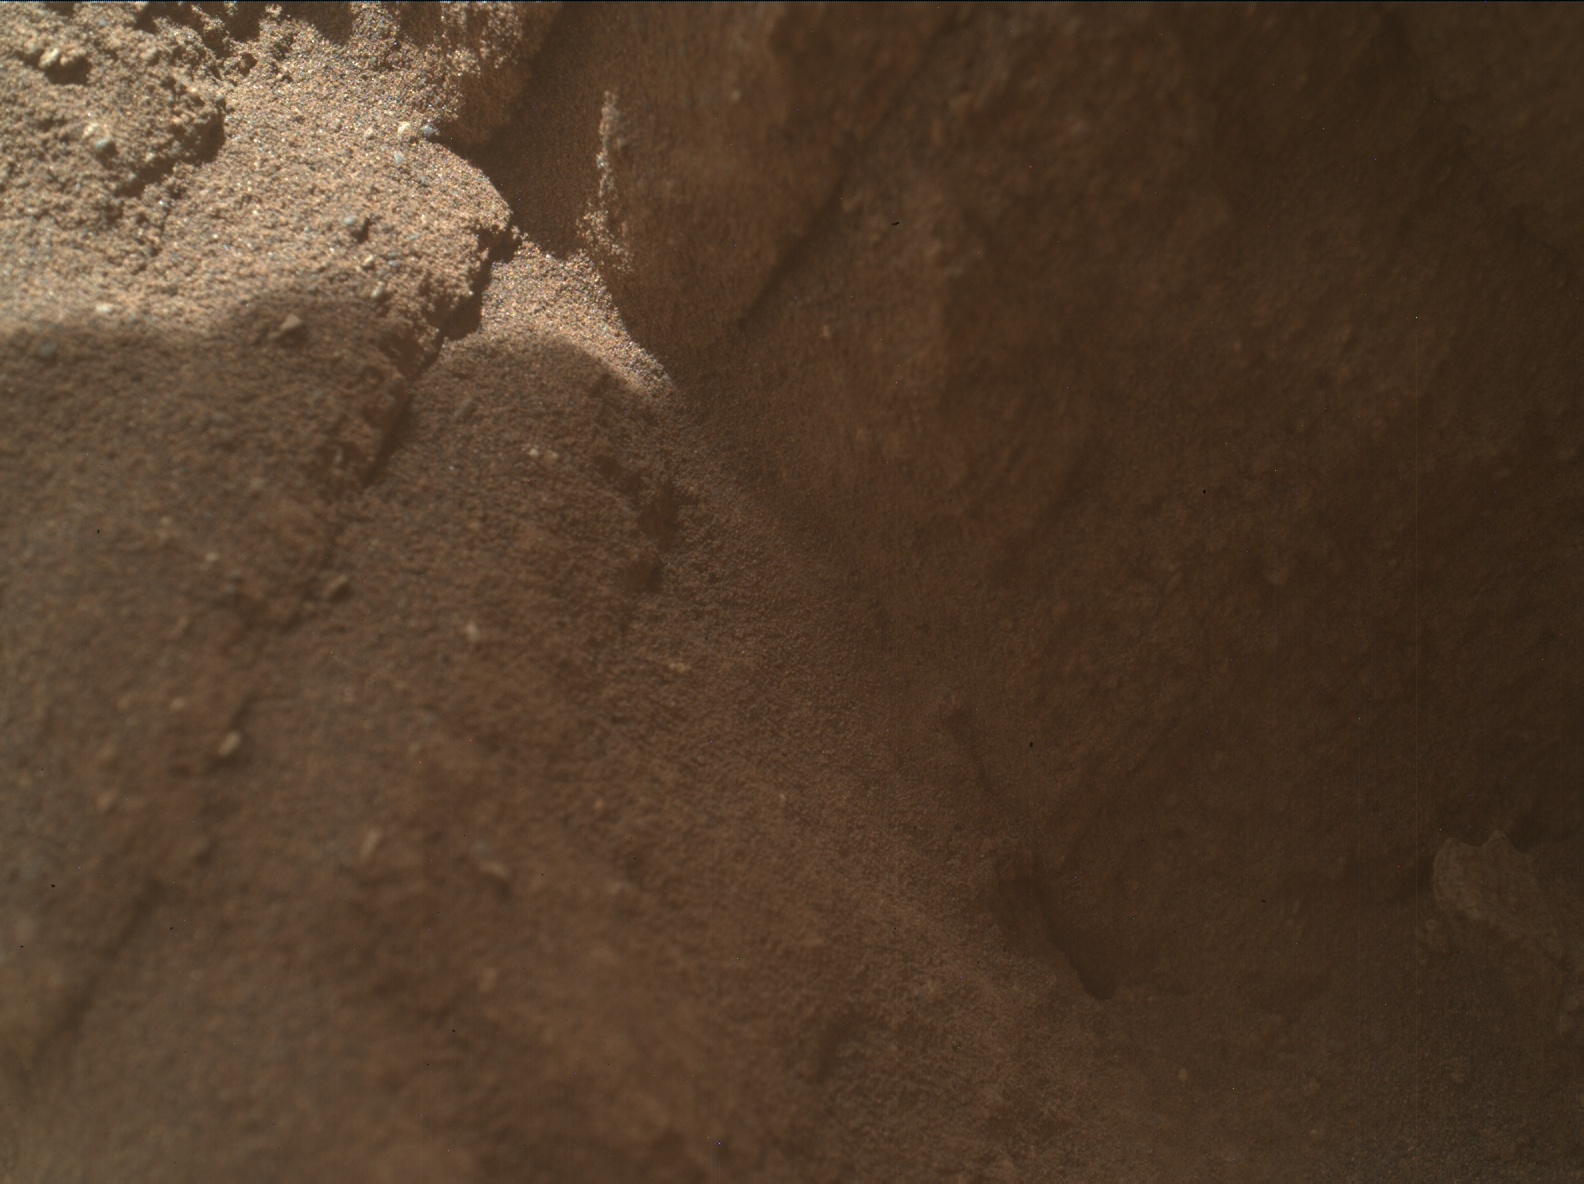 Nasa's Mars rover Curiosity acquired this image using its Mars Hand Lens Imager (MAHLI) on Sol 3749